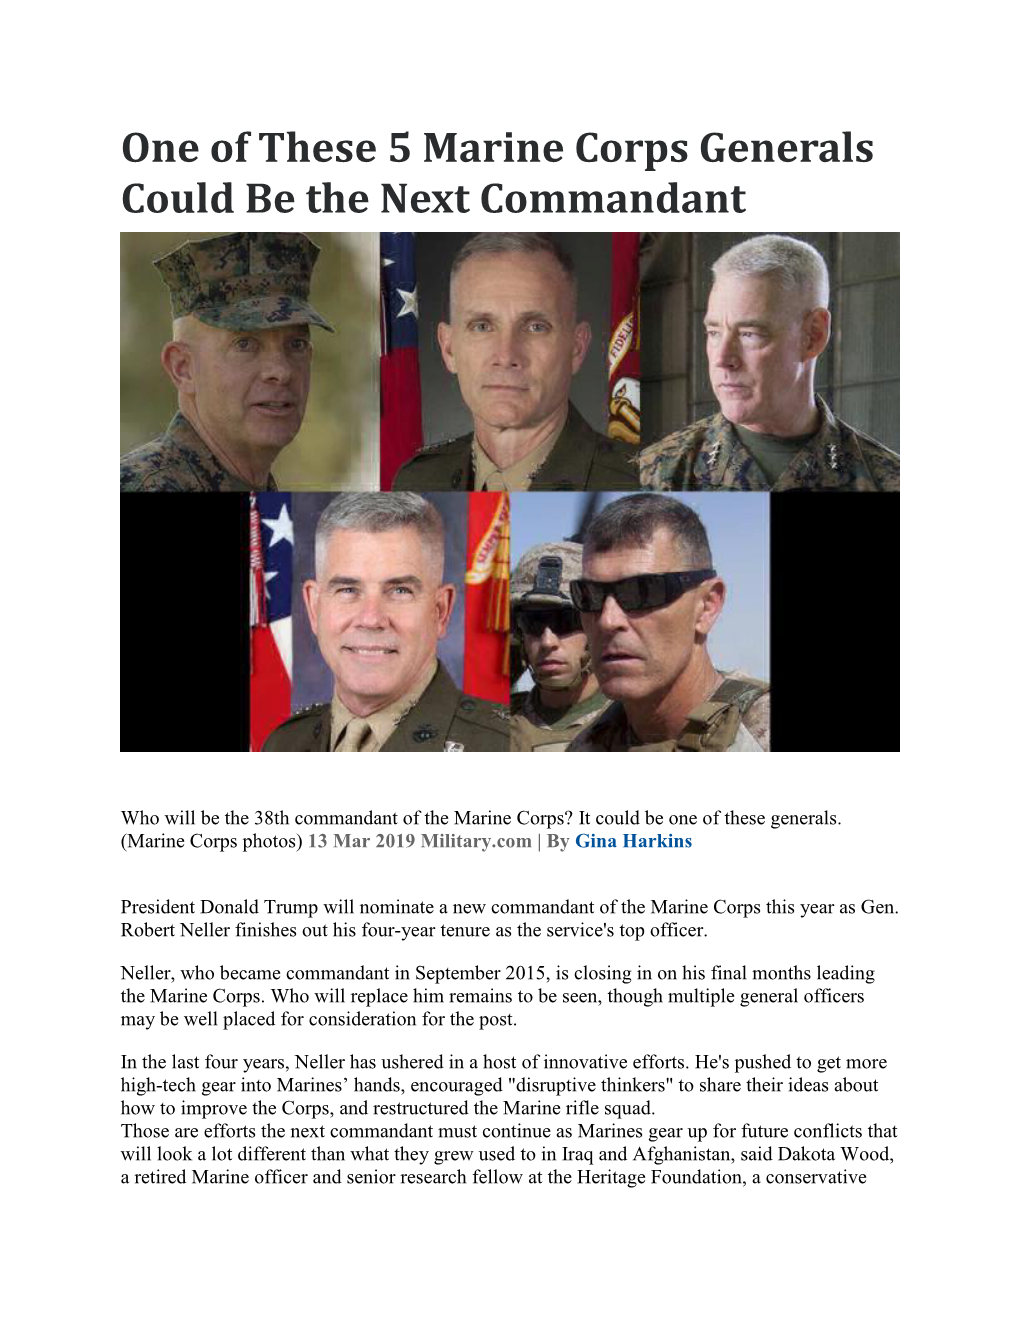 One of These 5 Marine Corps Generals Could Be the Next Commandant